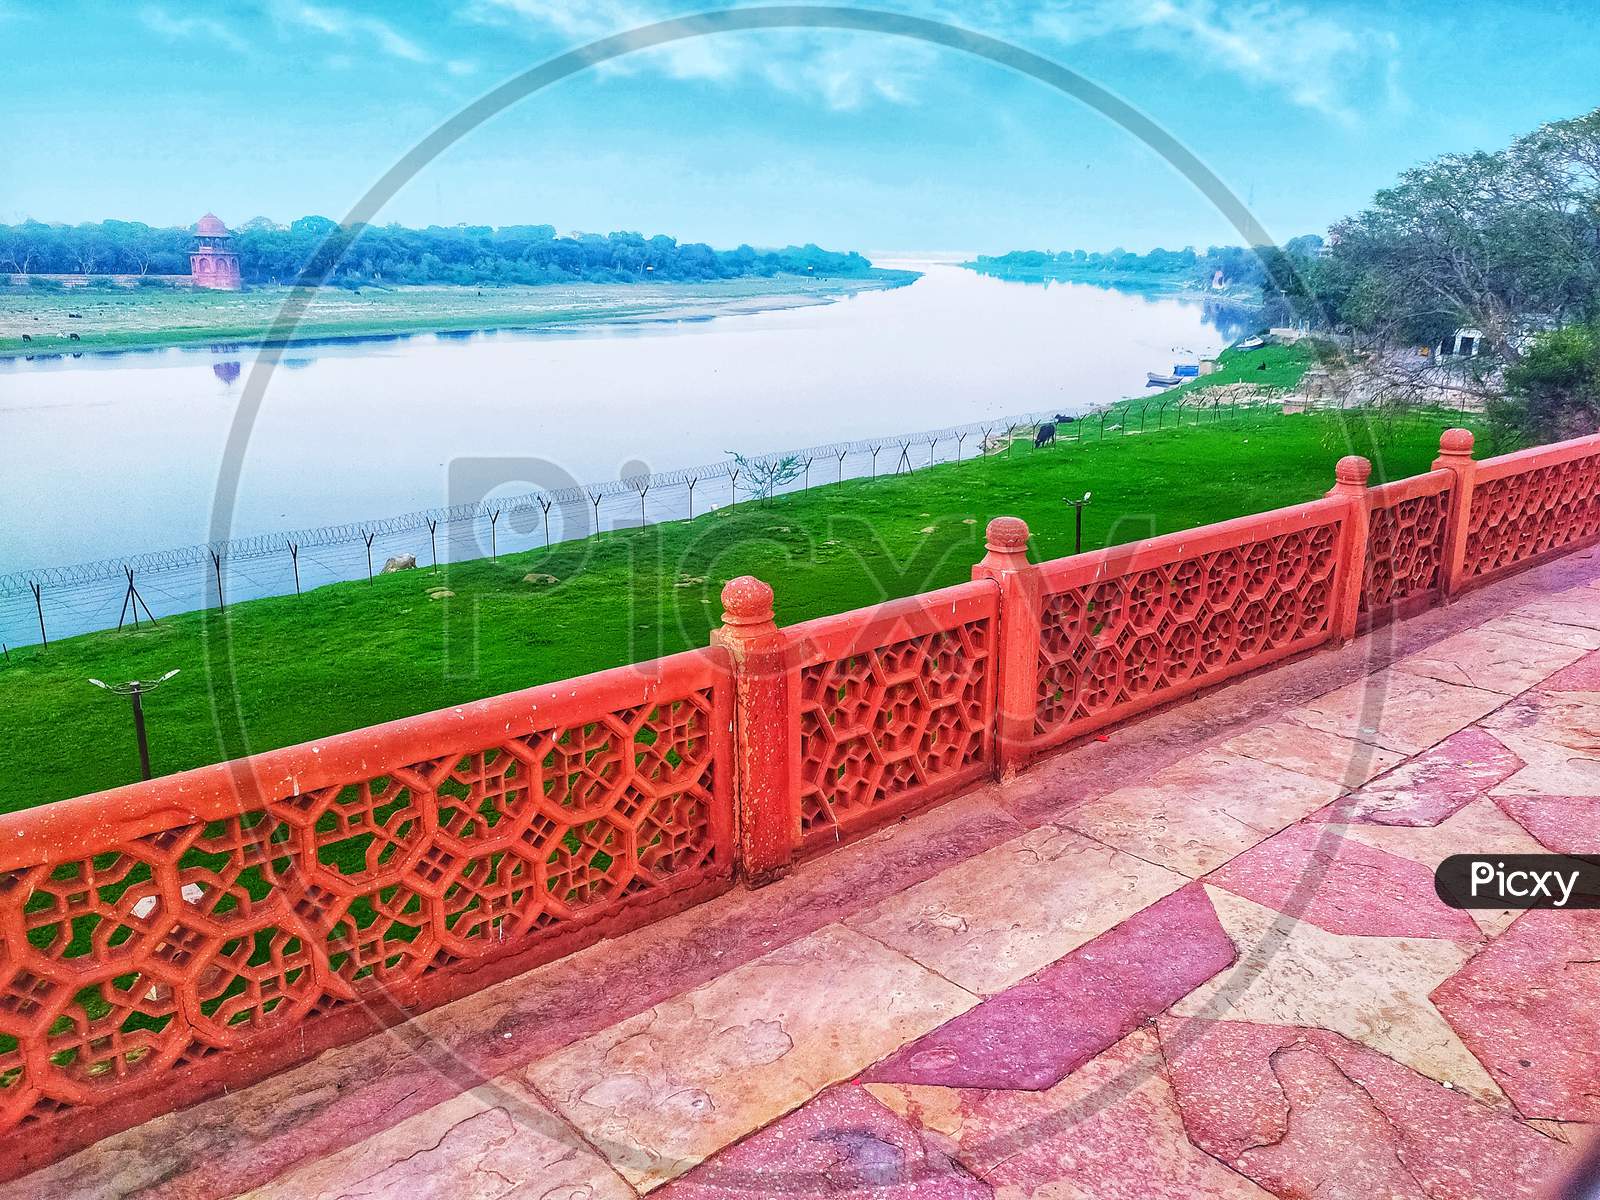 Yamuna river behind Taj Mahal. Agra, Uttar Pradesh, India. The Yamuna River flows behind the Taj Mahal, The picture clicked from Taj Mahal. landscape photography and selective focus